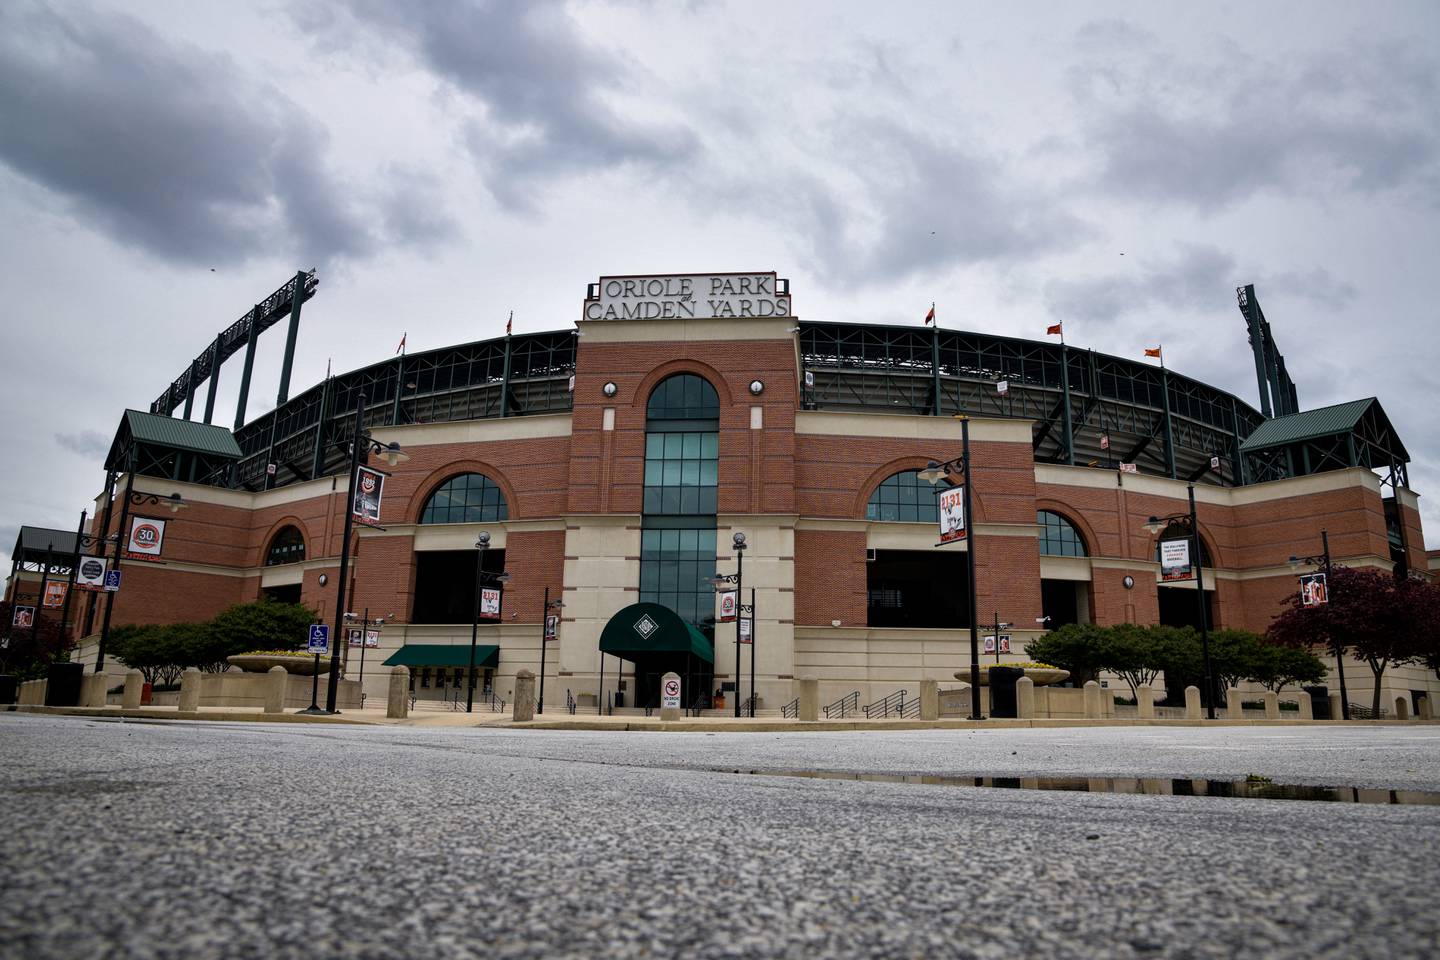 Stadium countdown: No. 10 - Oriole Park changed the game